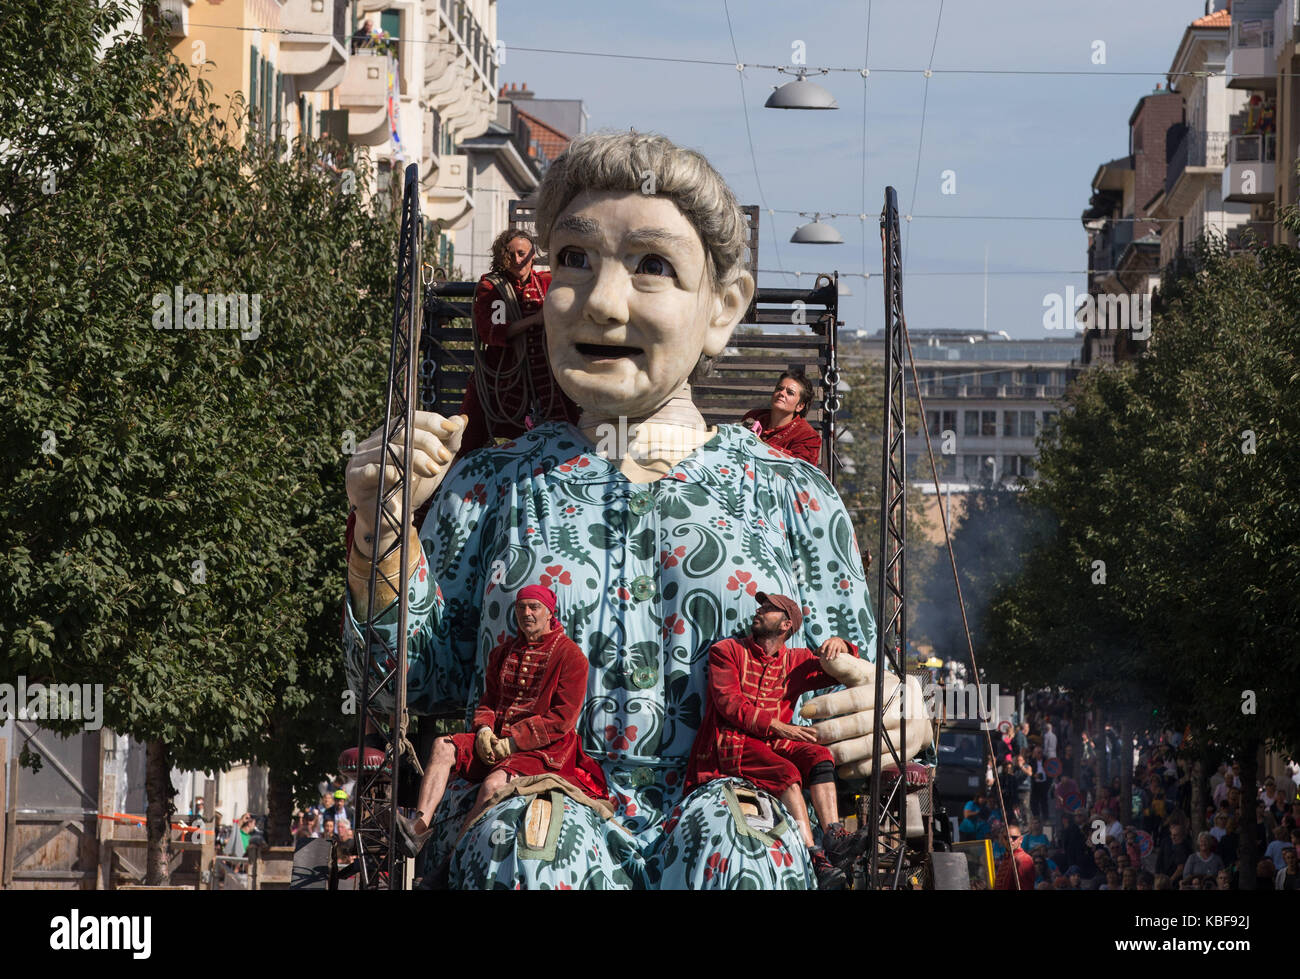 Geneva, Switzerland. 29th Sep, 2017. A grandmother giant puppet, measuring nearly 8 meters, marches on the street of Geneva, Switzerland, Sept. 29, 2017. Two giant puppets of the Royal de Luxe Company, which travels around the world, guest in Geneva from Sept. 29 to Oct. 1. Credit: Xu Jinquan/Xinhua/Alamy Live News Stock Photo